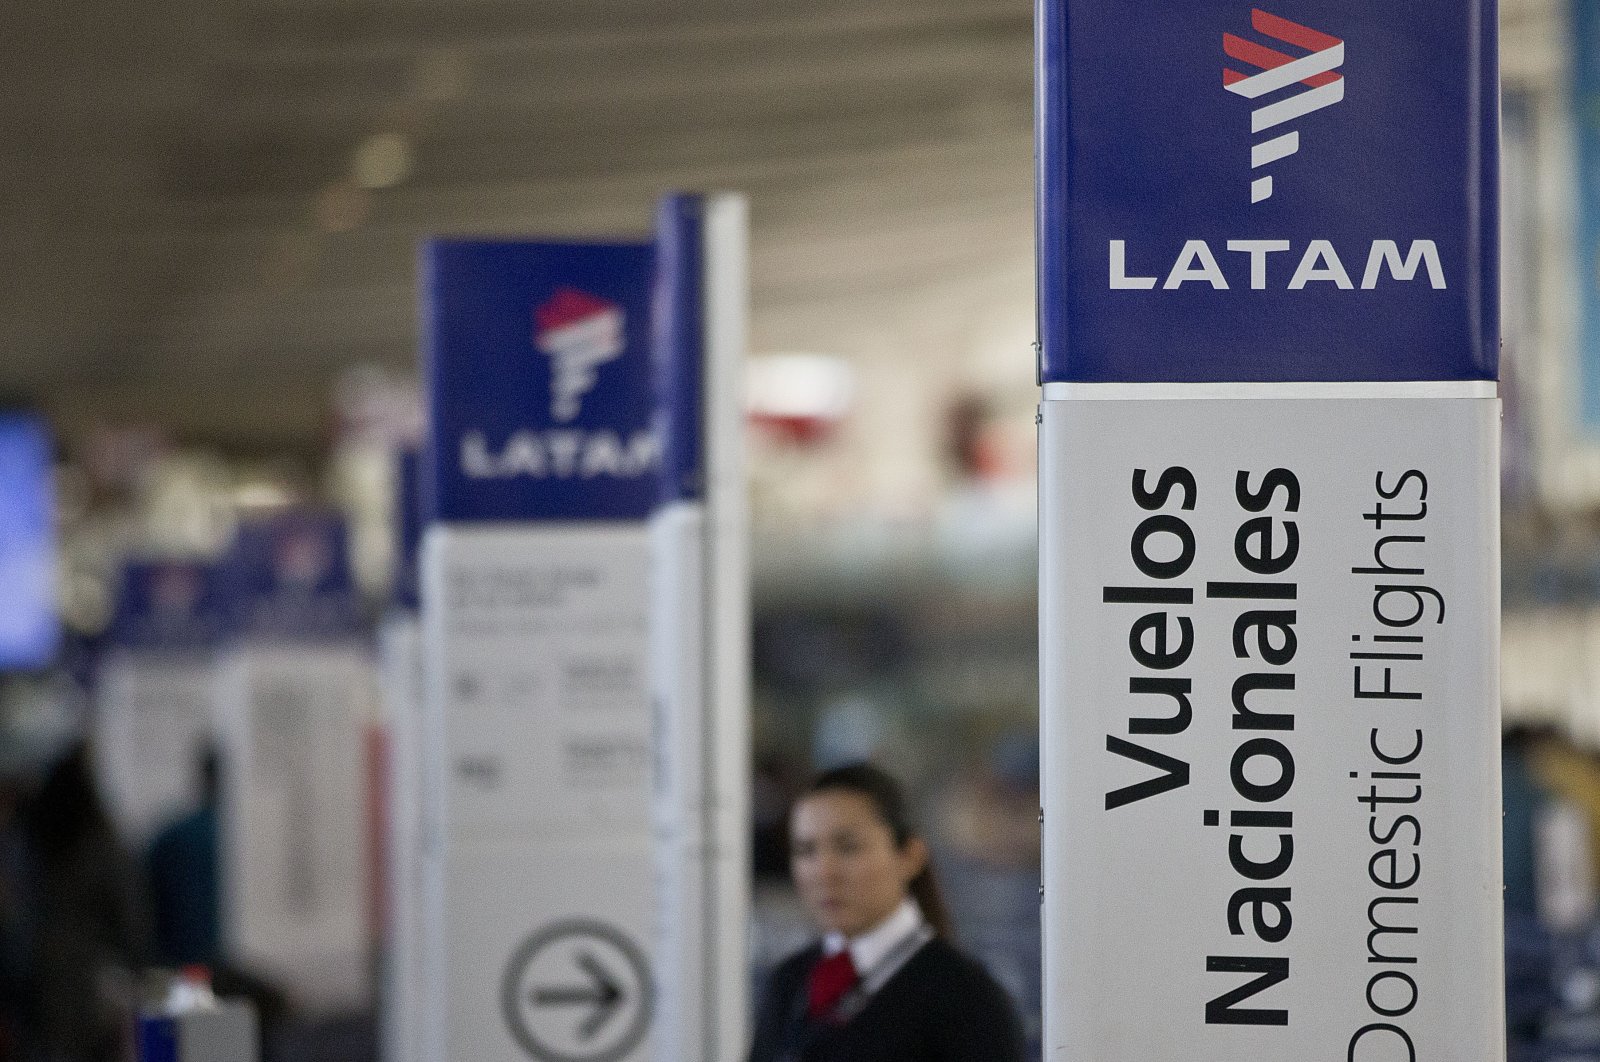 An agent of LATAM airlines stands by the counters at the airport in Santiago, Chile, July 25, 2016. (AP Photo)